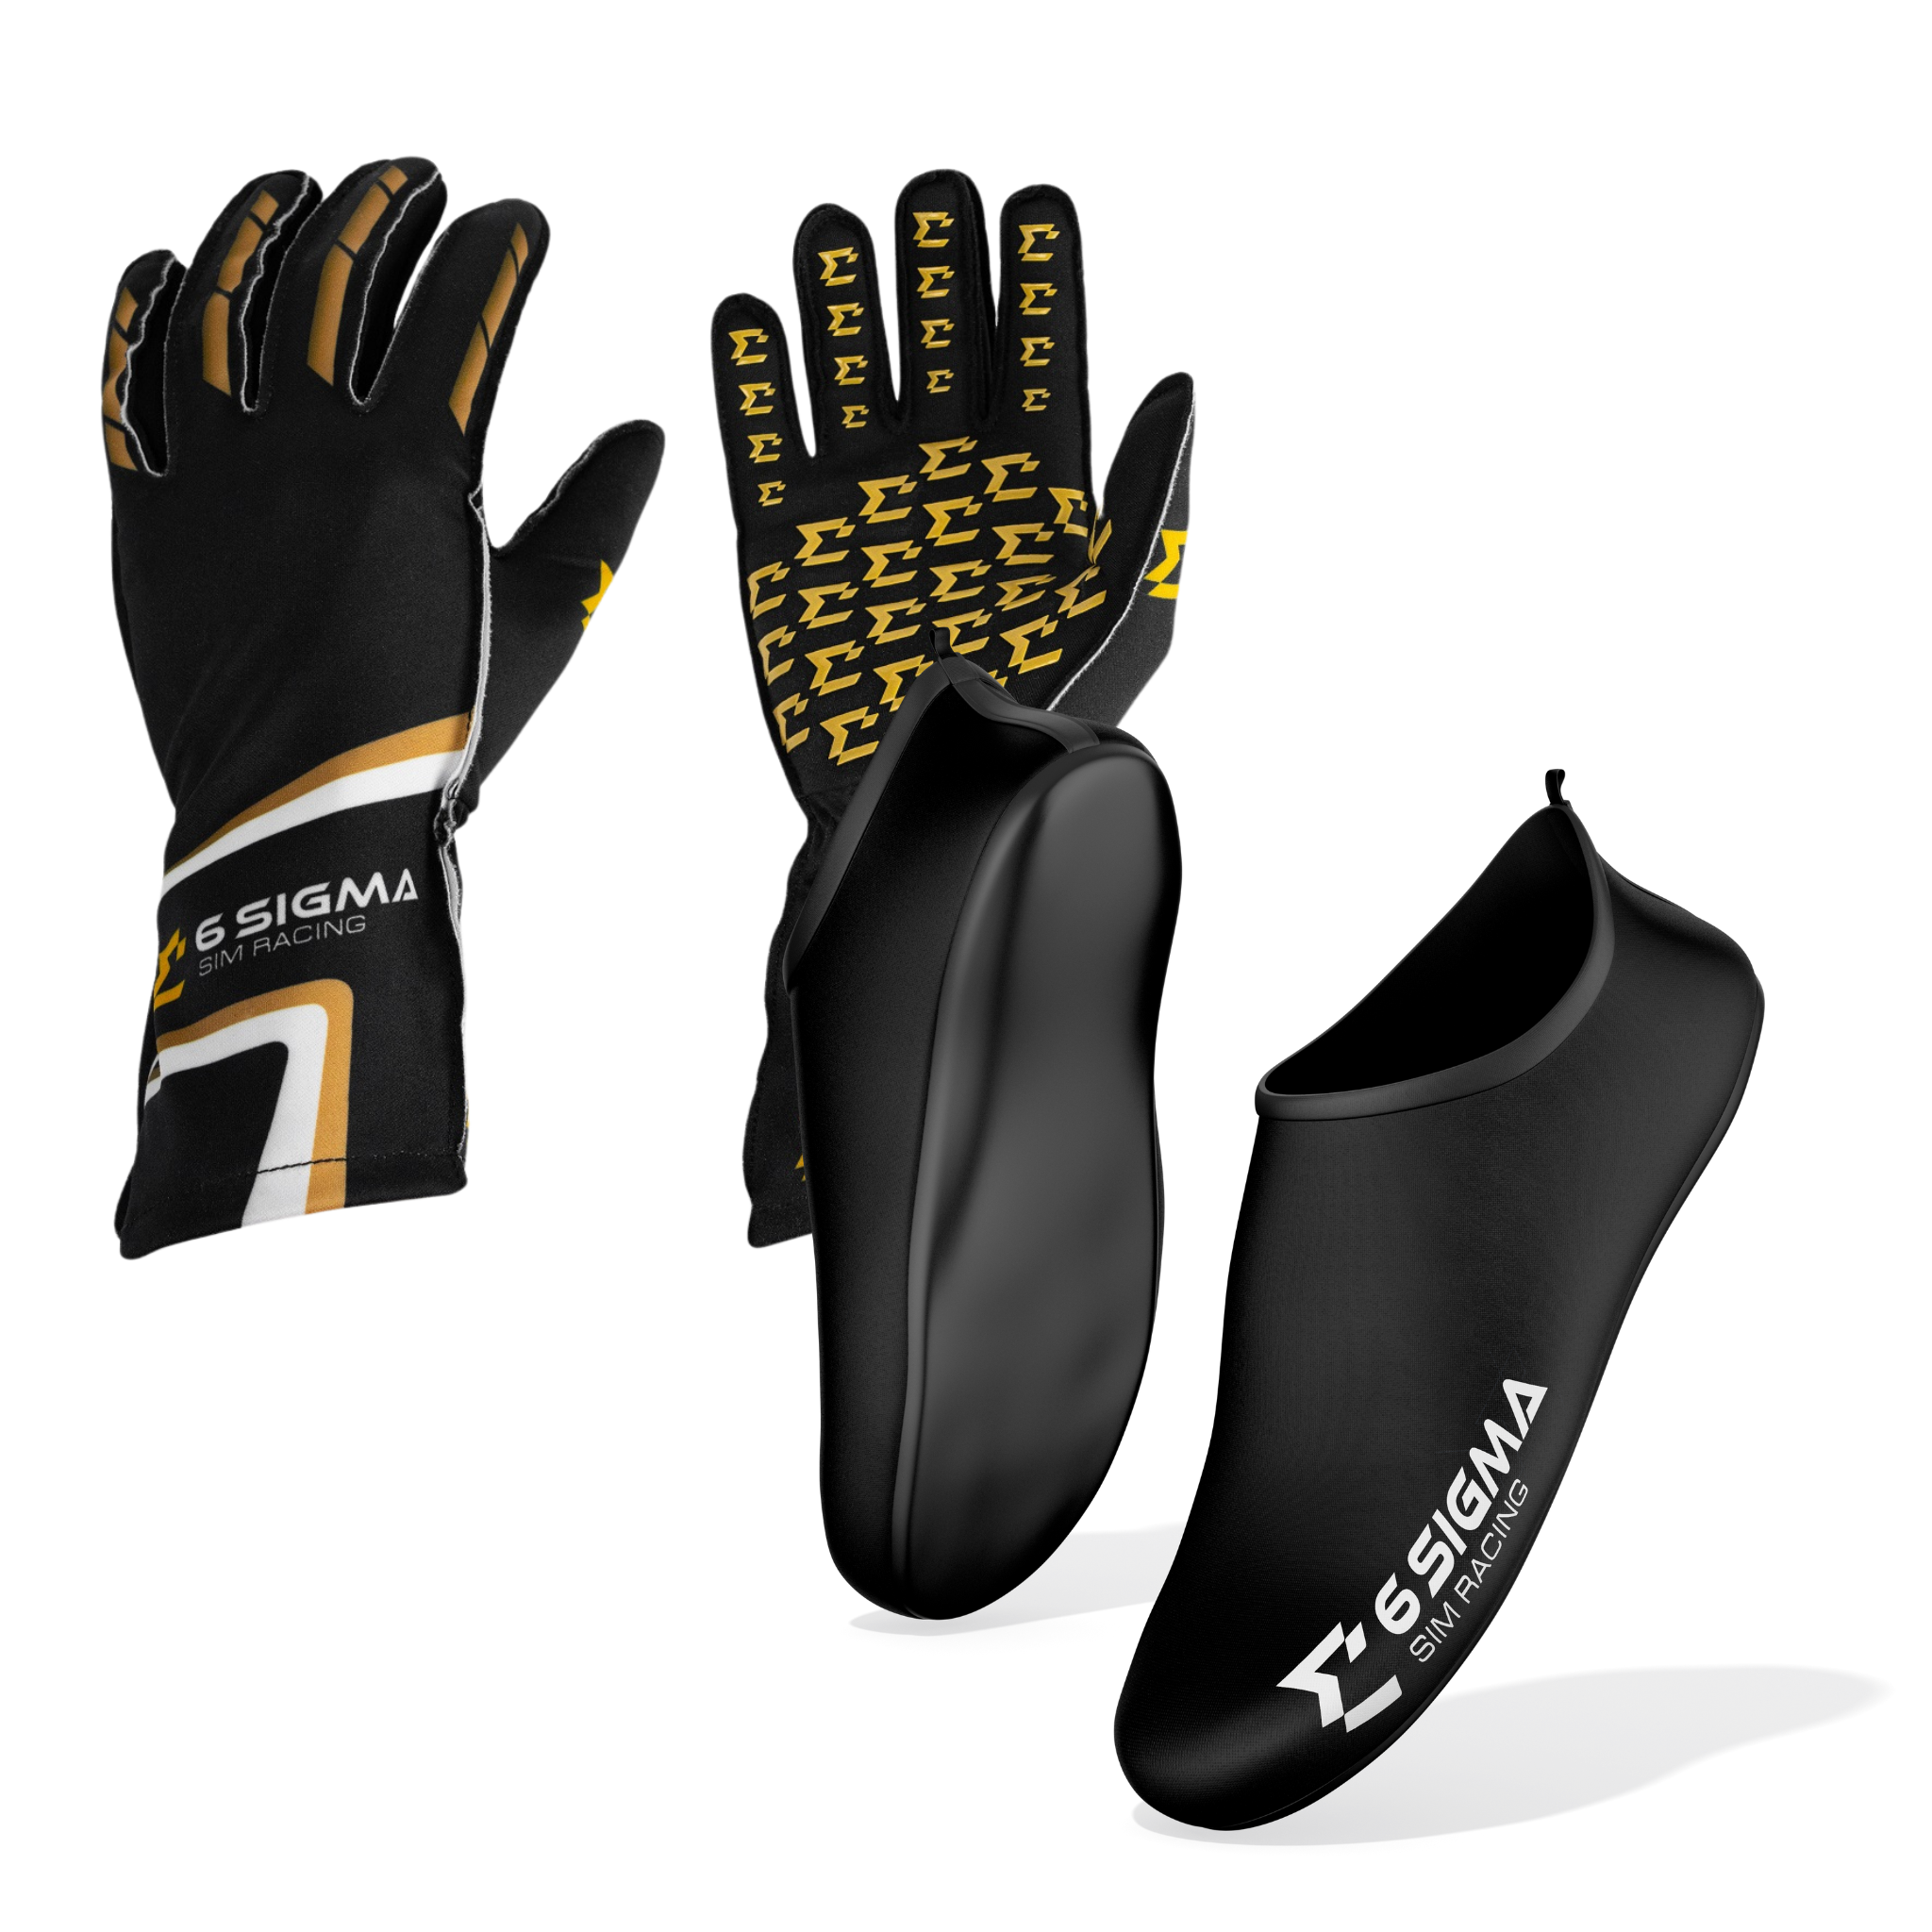 Racing Gloves & Shoes (Select Shoe size/Gloves Size)